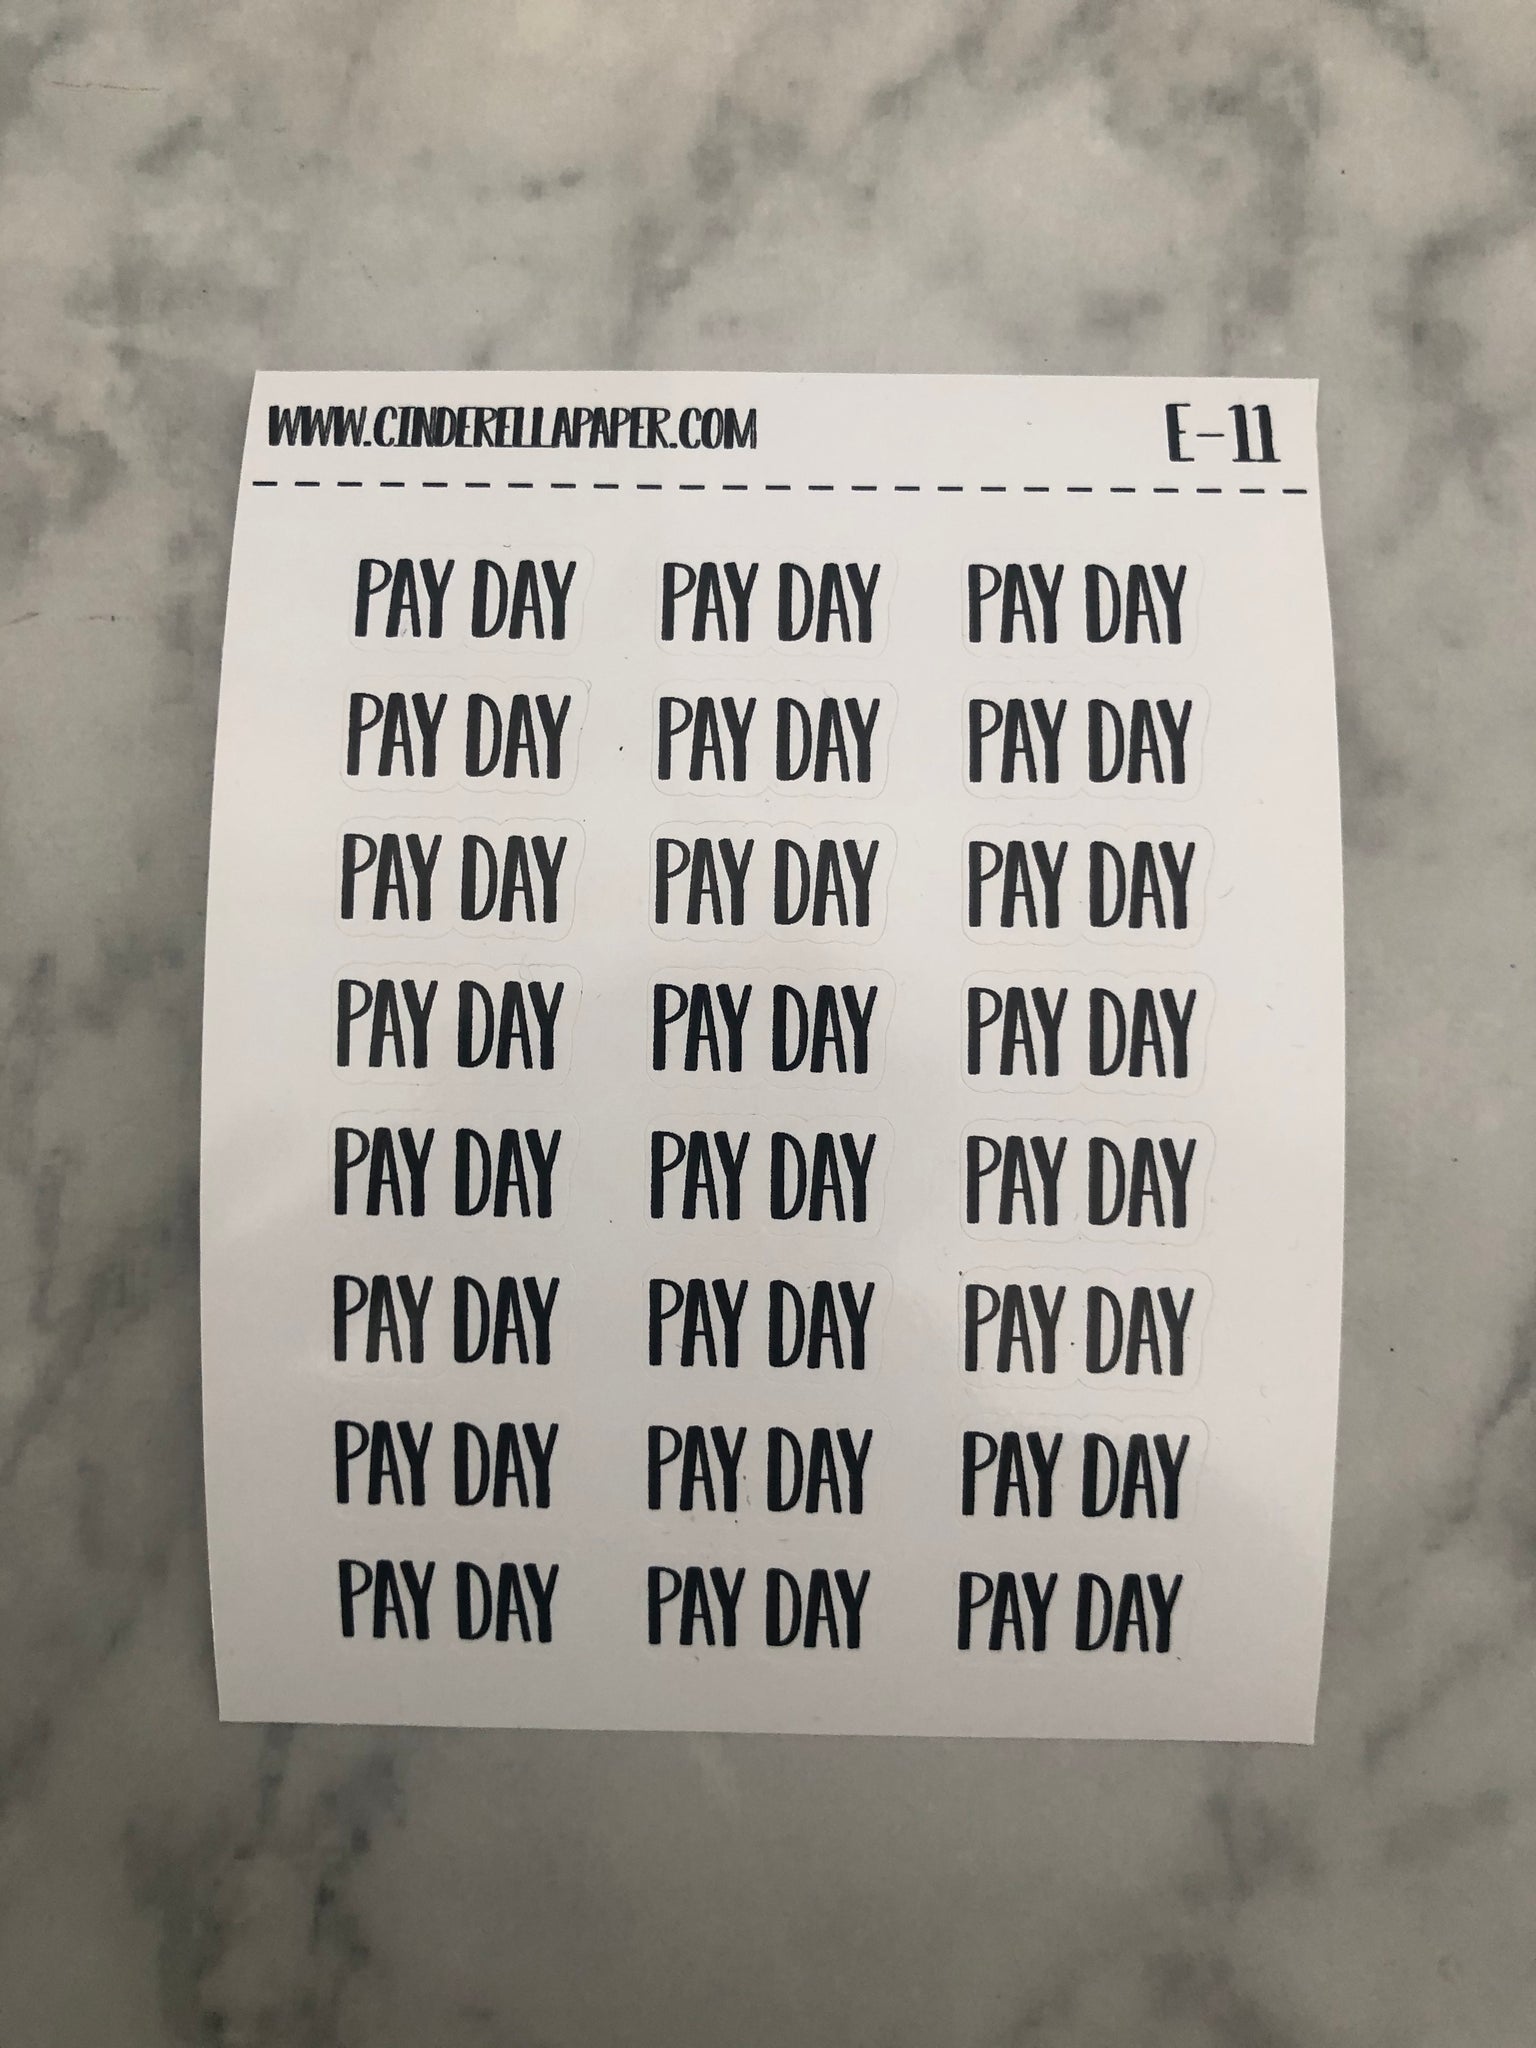 Pay Day || E-11 - CinderellaPaper